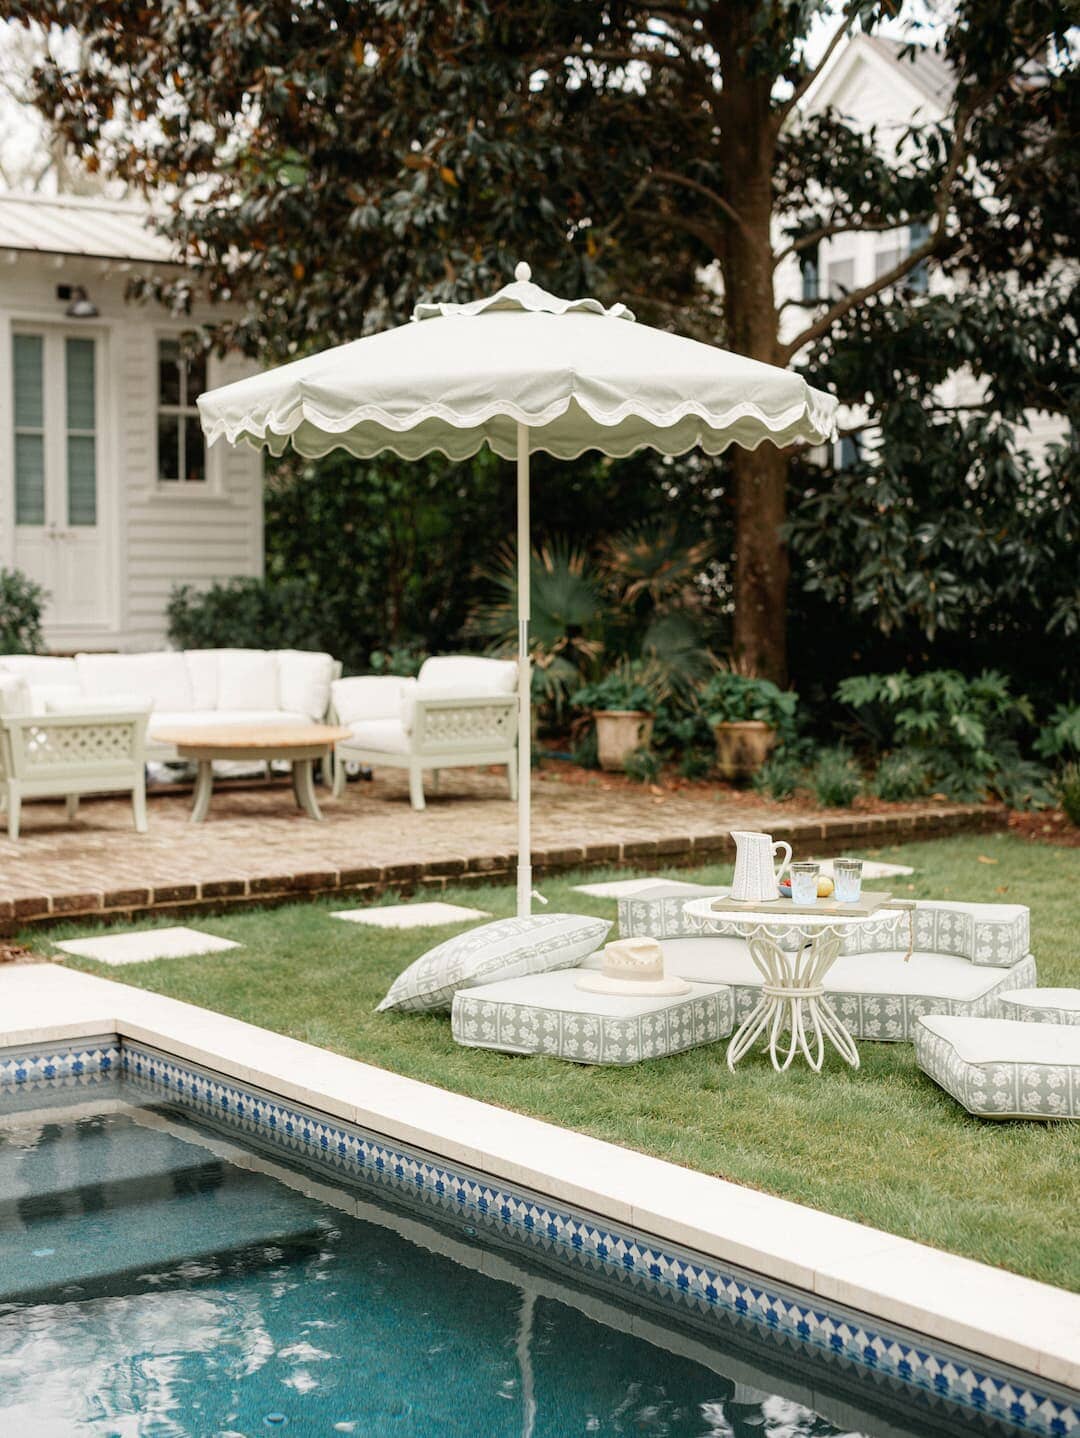 outdoor pool area with umbrella and outdoor cushions